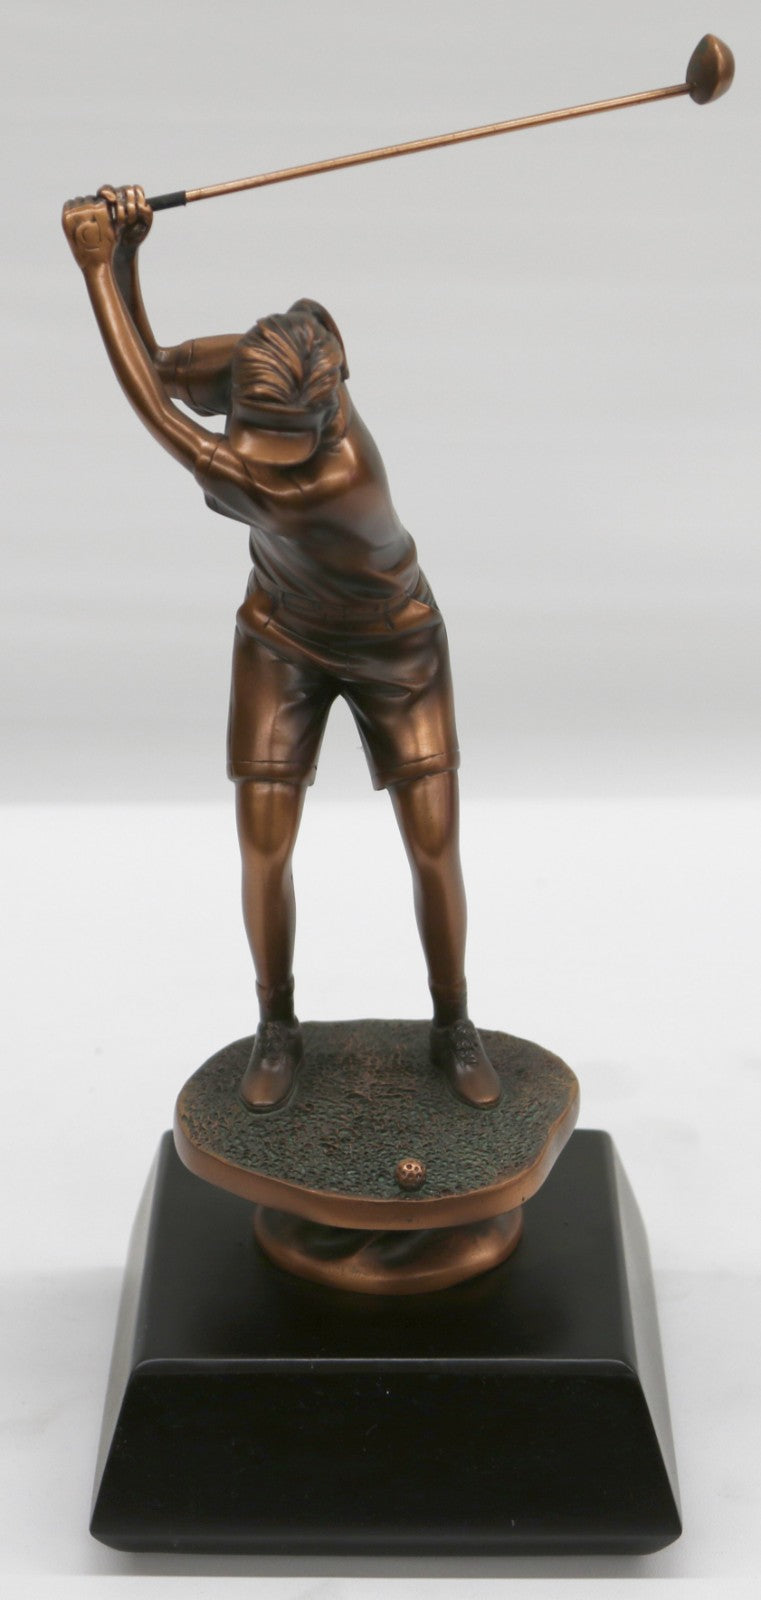 Golfer Bronze Plated Golf Statue Sculpture Figure With Large Base Figurine